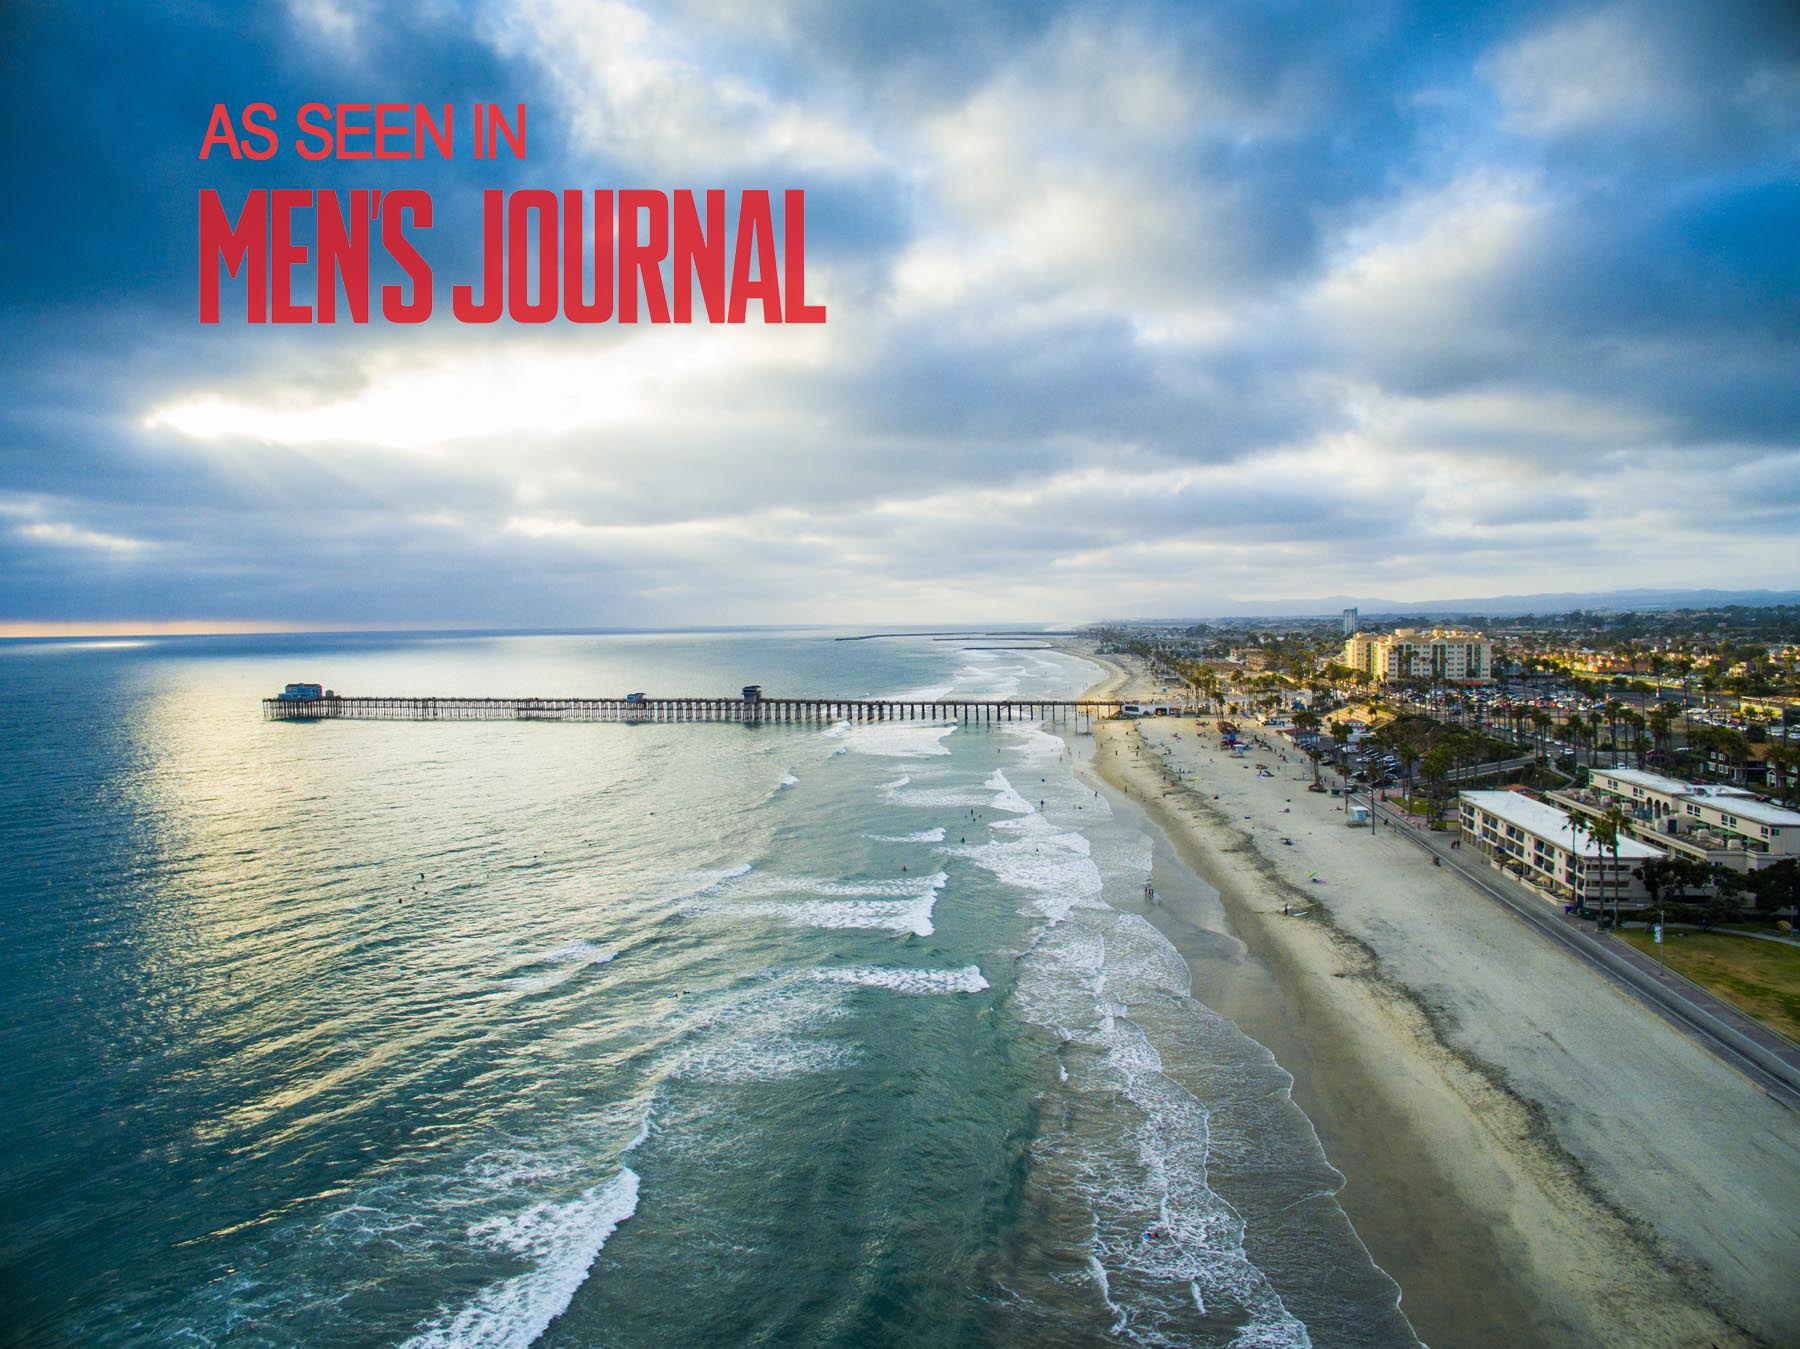 Drone Photograph of Oceanside Pier at Sunset with Mens Journal Logo